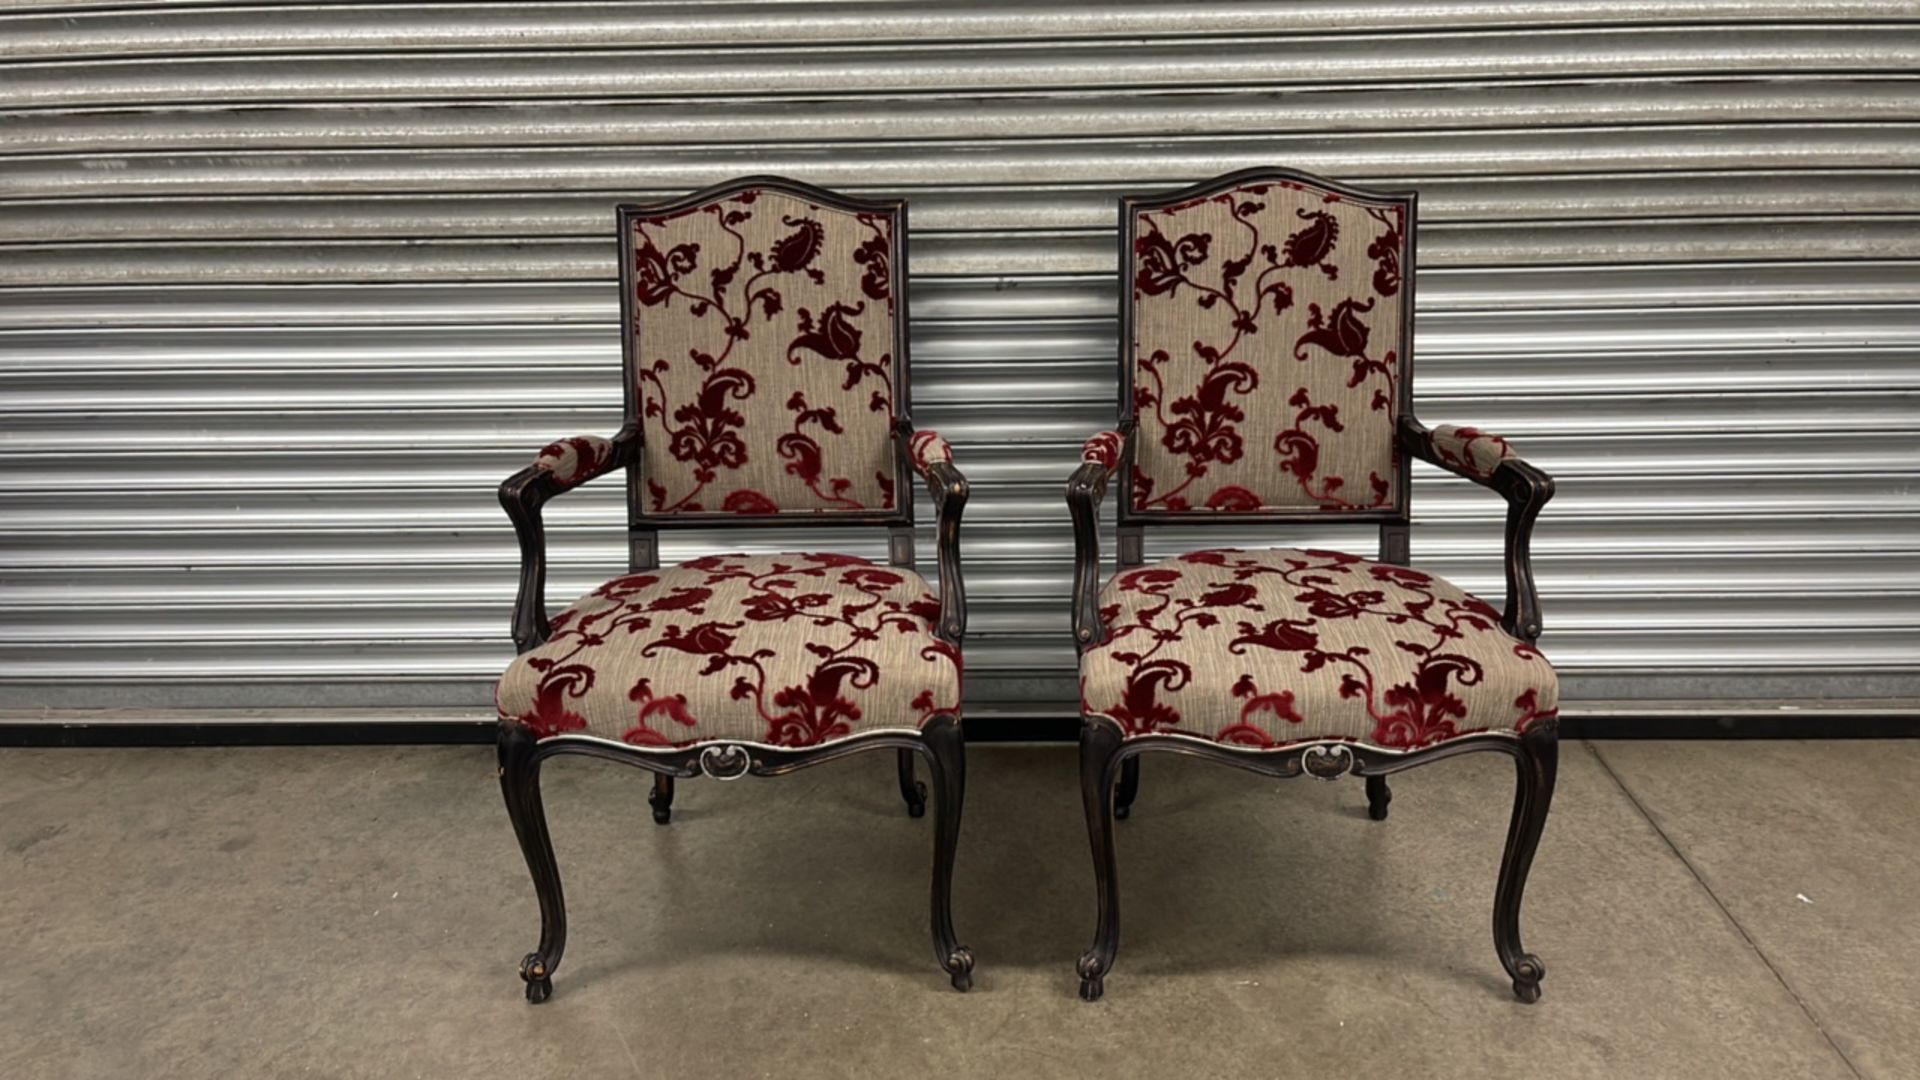 Pair of Roche Bobois Floral Dining Chairs with Arms RRP £650 Per Chair - Image 2 of 8